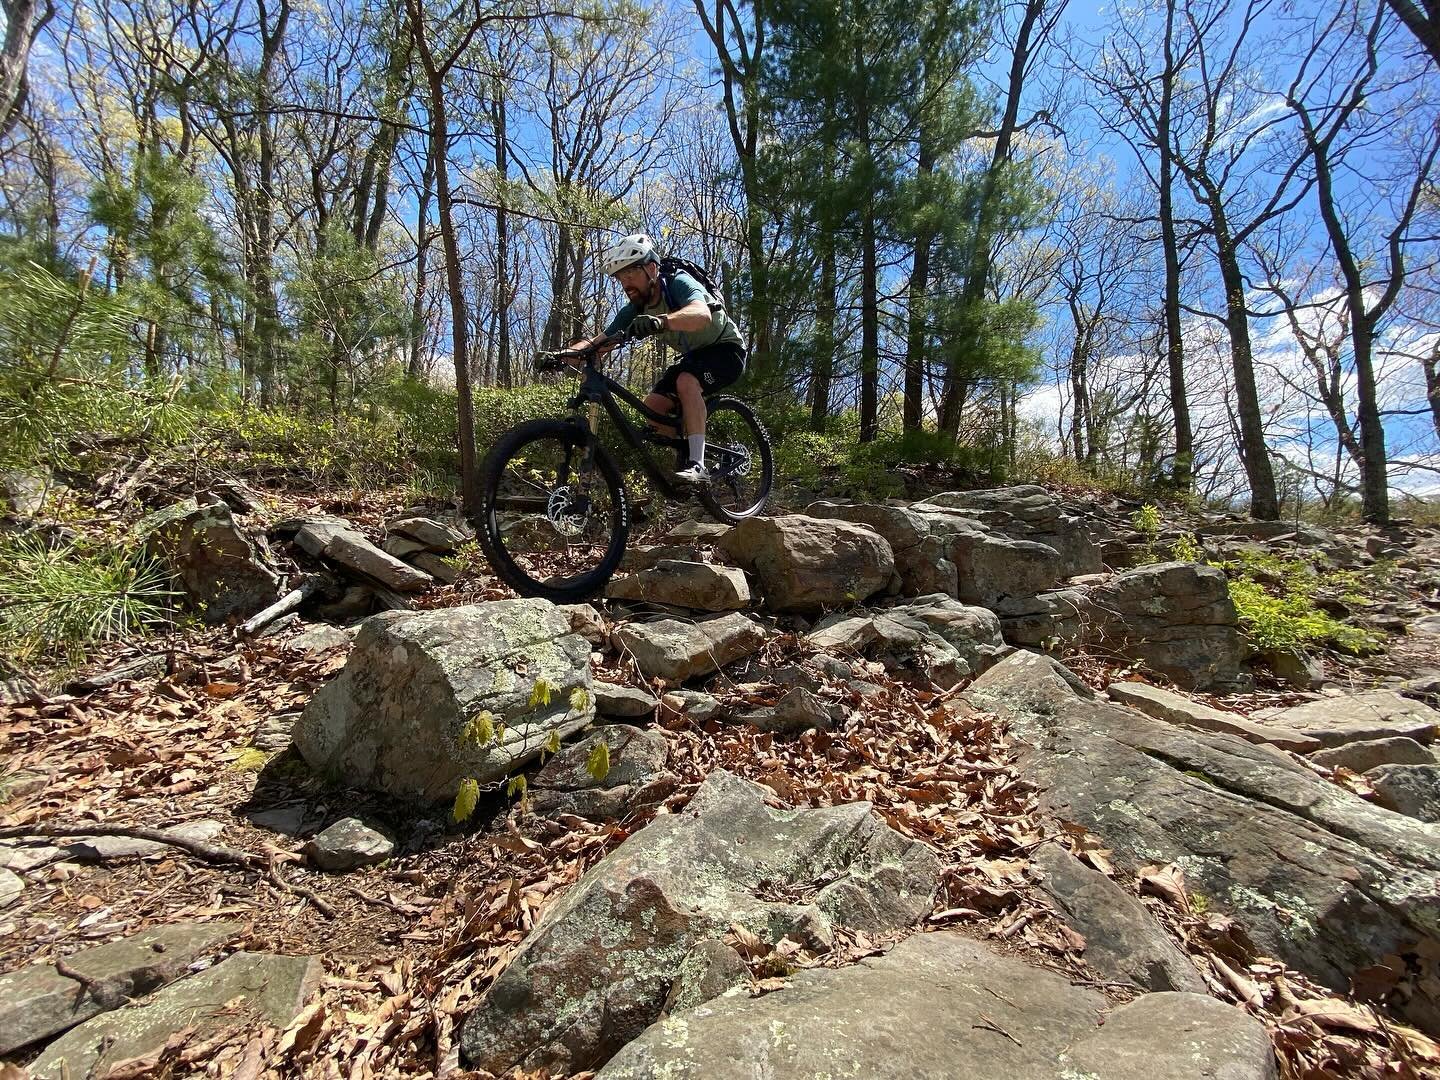 New Bike Day for both Tom and Joey and they couldn&rsquo;t think of  better way to christen them than to immediately hit Lookout and Narrowback for a proper shakedown run! Tom got settled in on his new @ibiscycles Ripmo while Joey set the race pace o